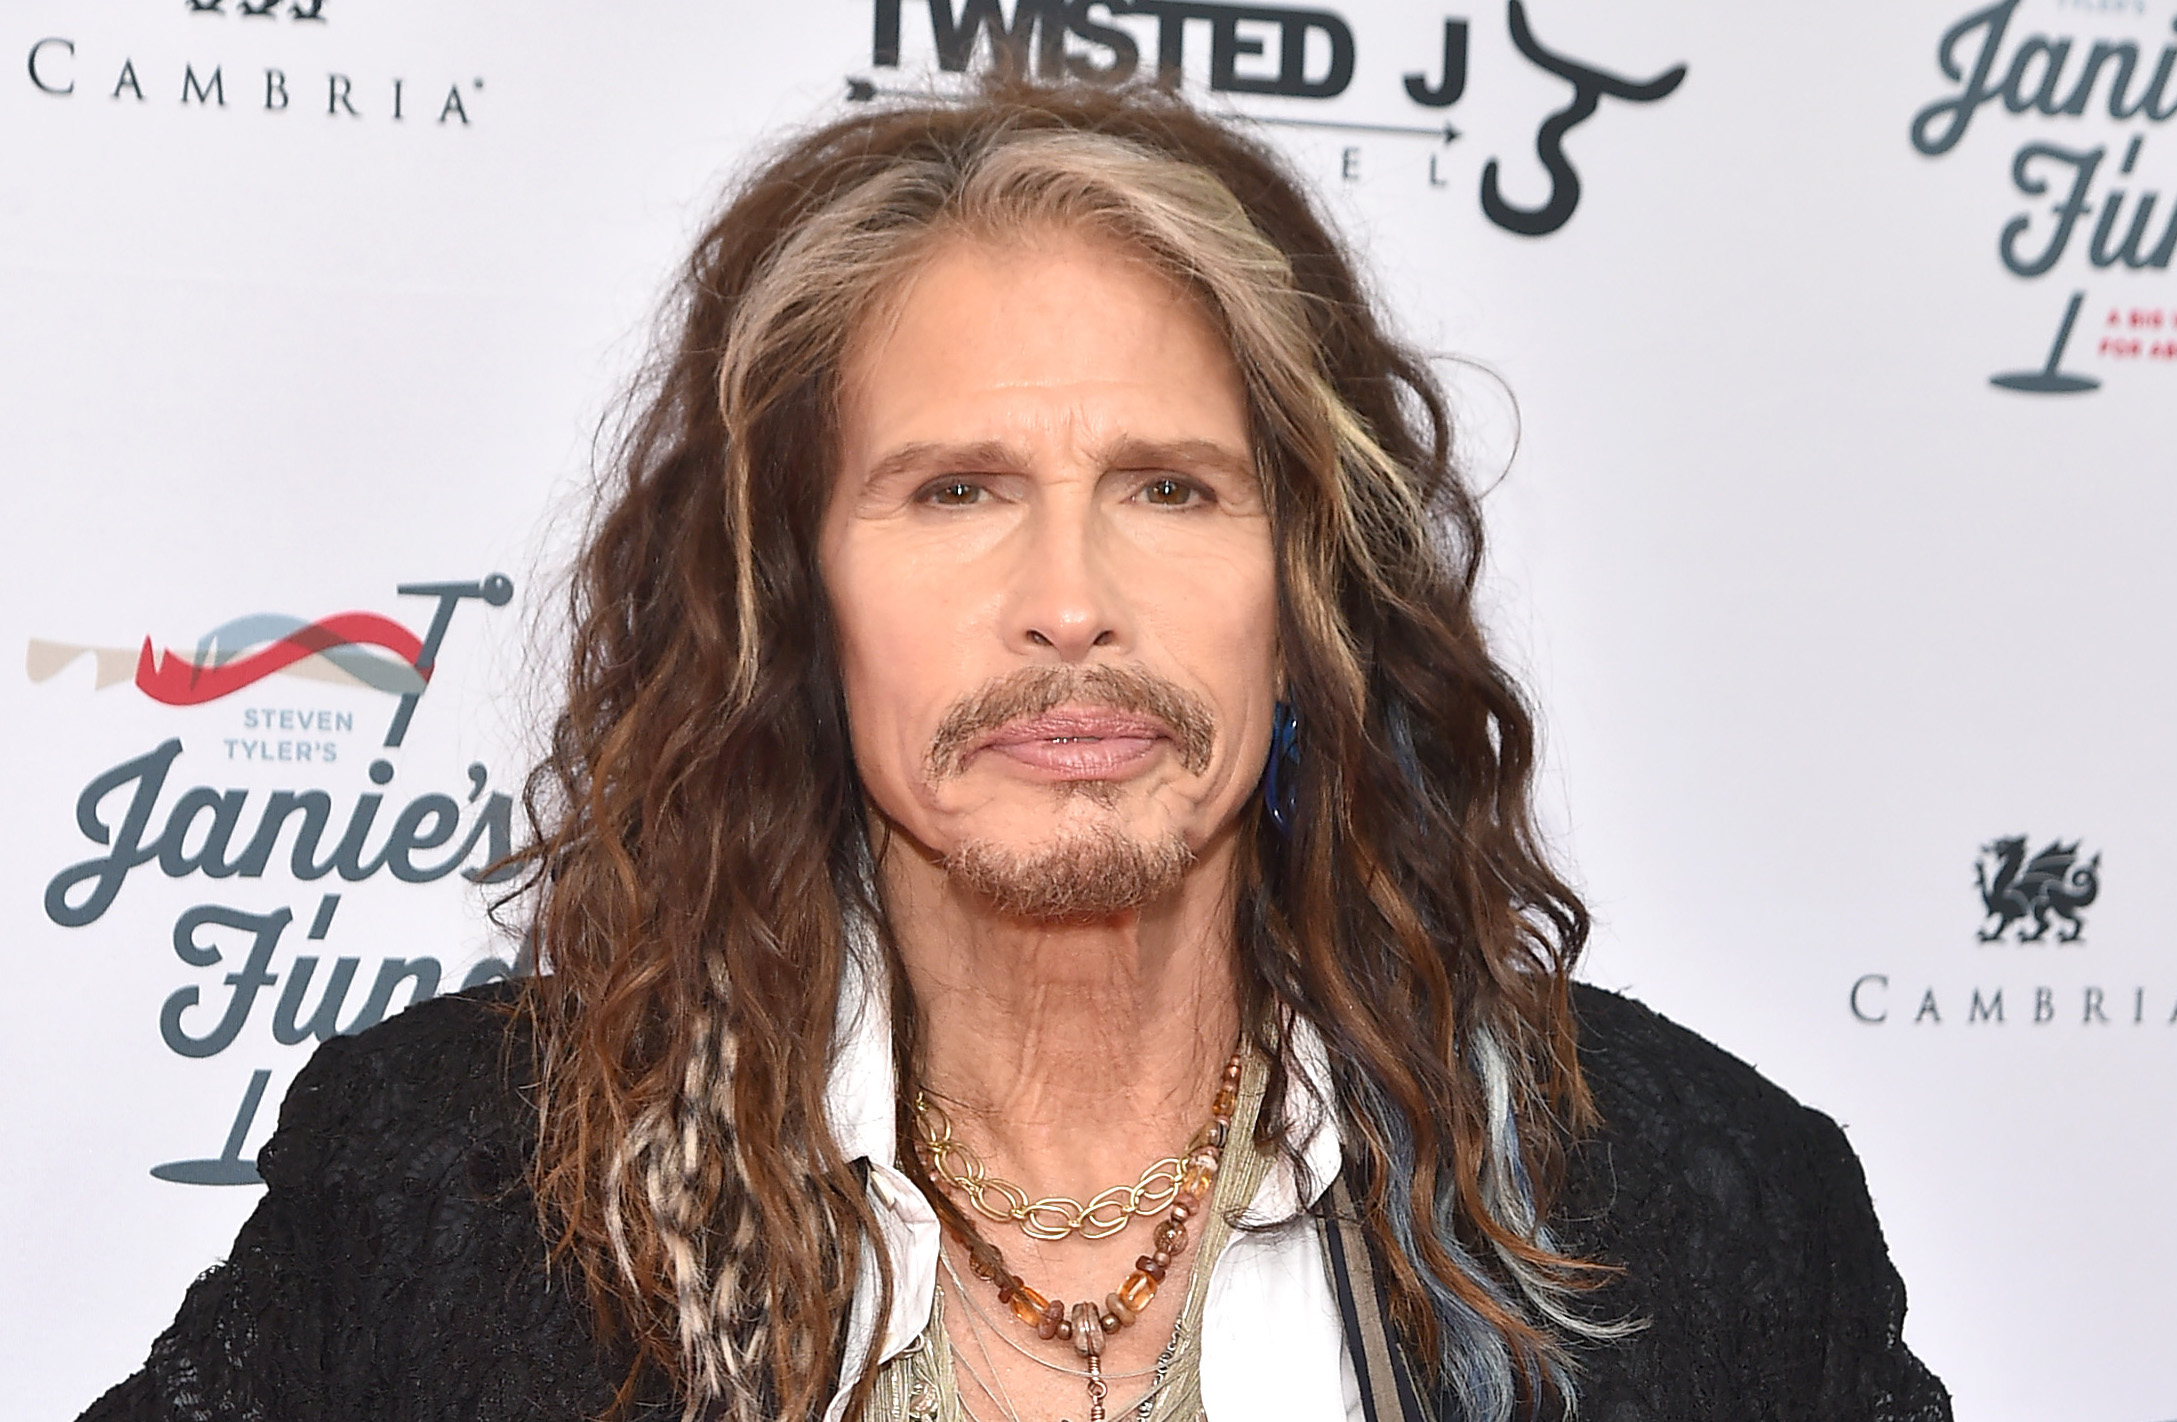 Aerosmith’s Steven Tyler Finally Responds To Claims He Allegedly Sexually Assaulted A Minor